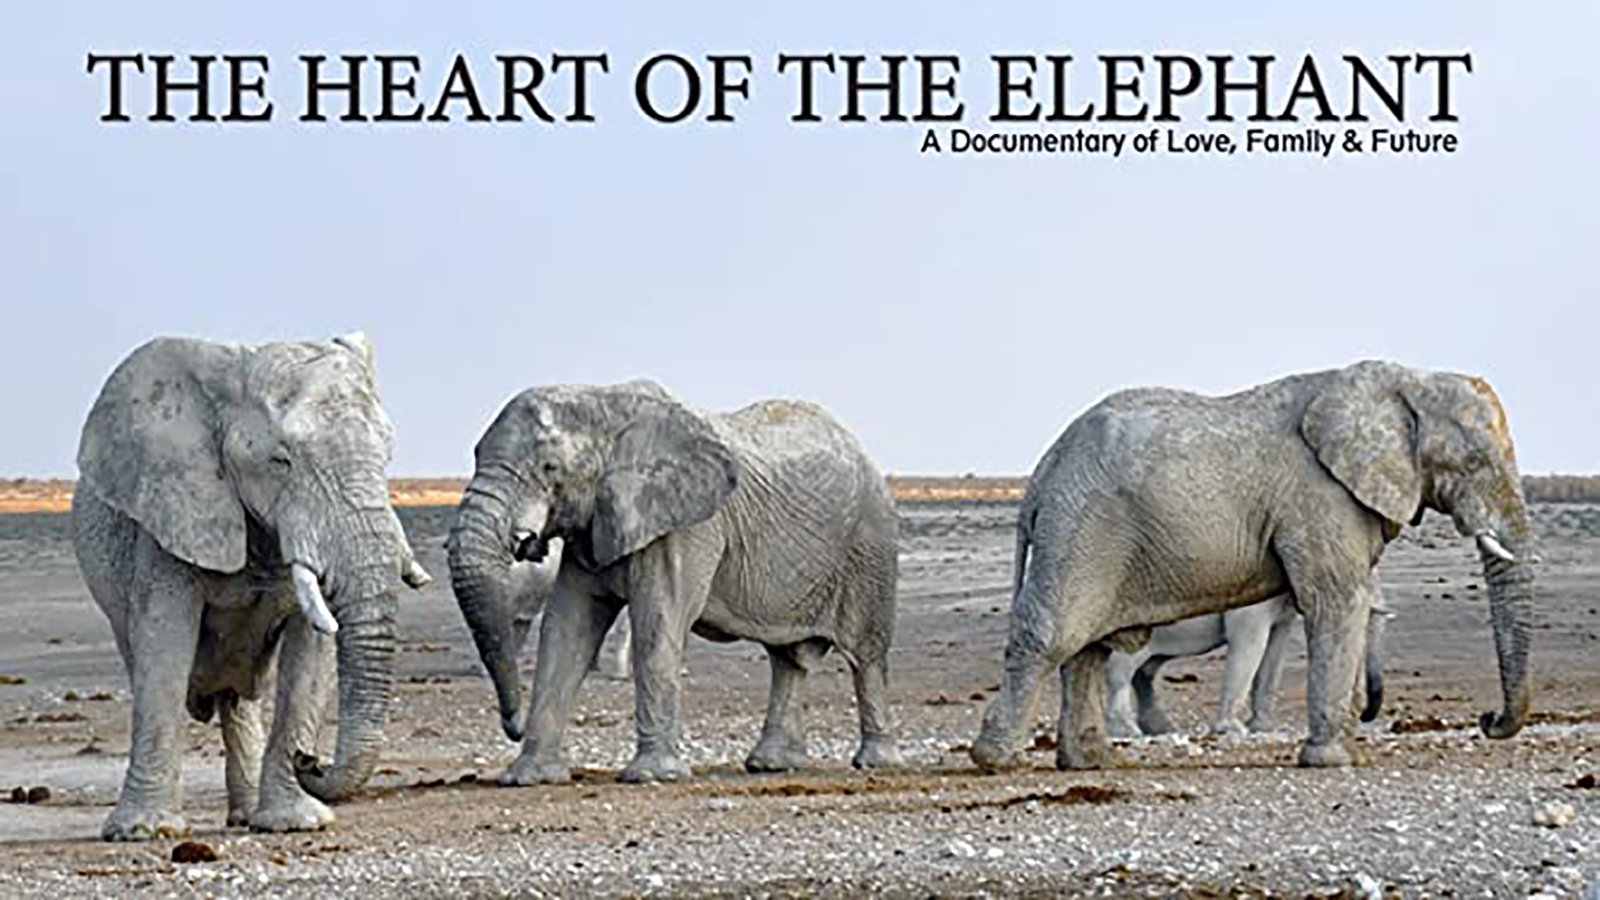 The Heart of the Elephant